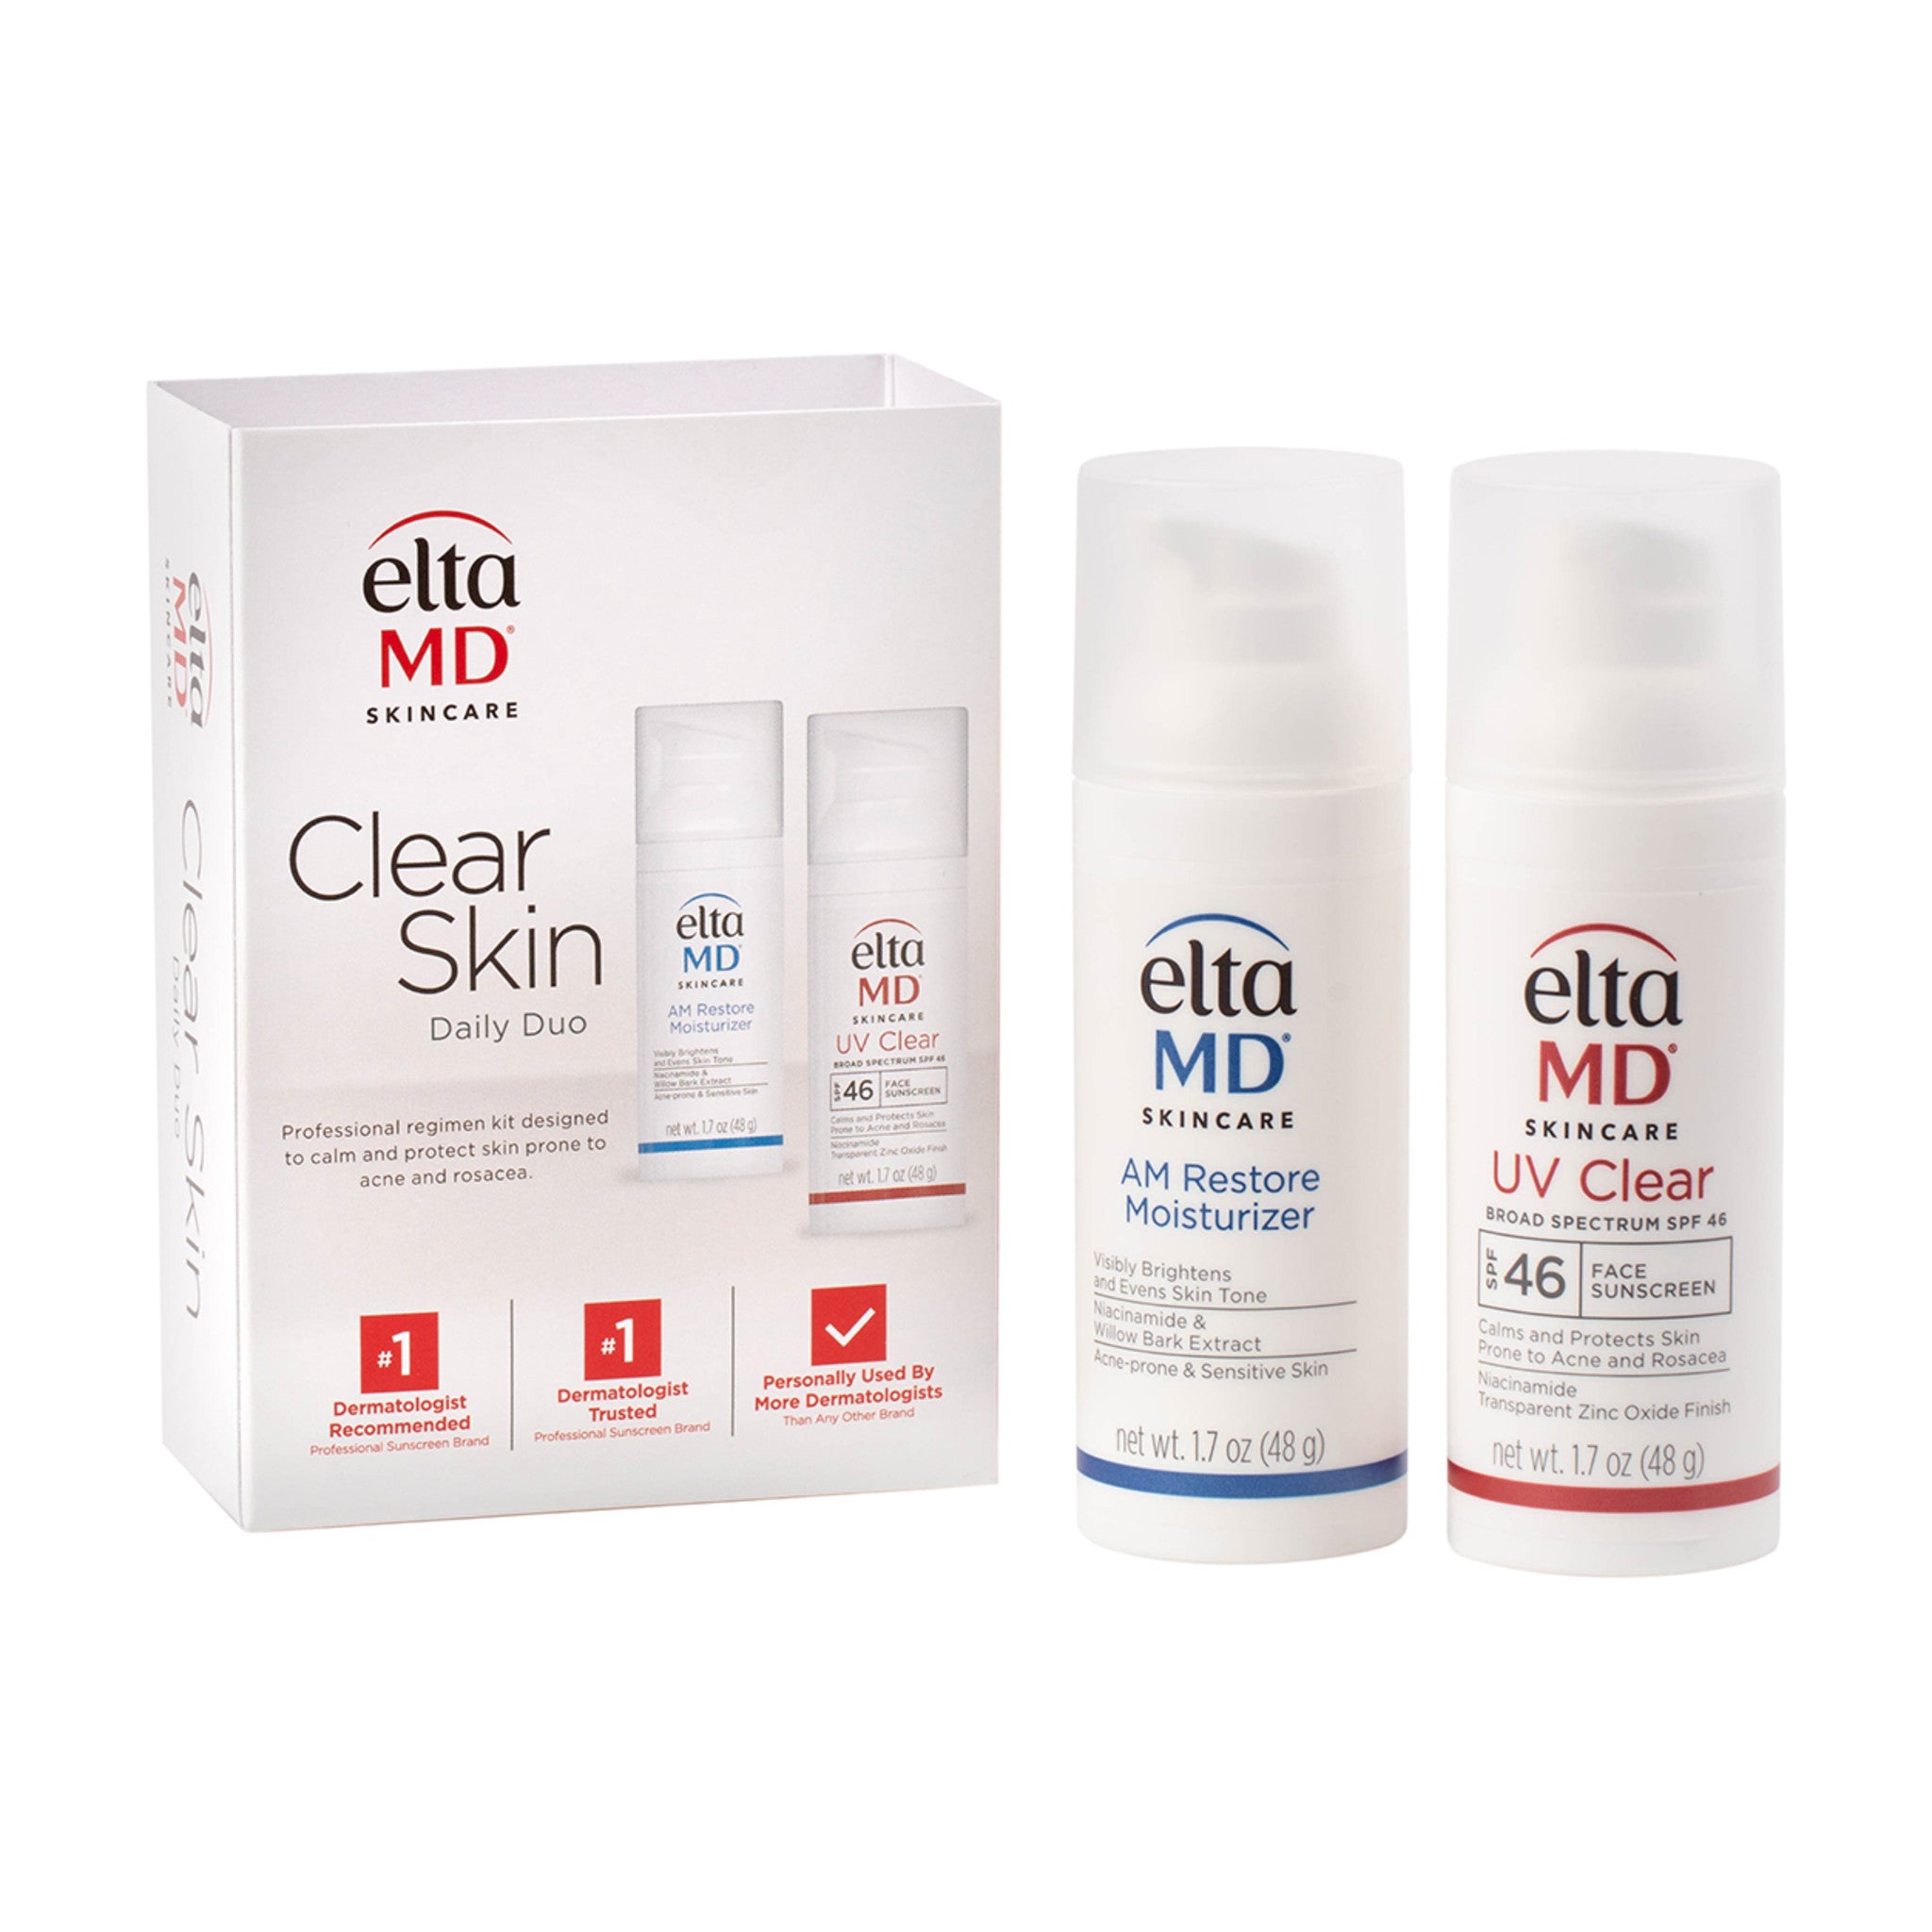 EltaMD Clear Skin Daily Duo Kit main image.